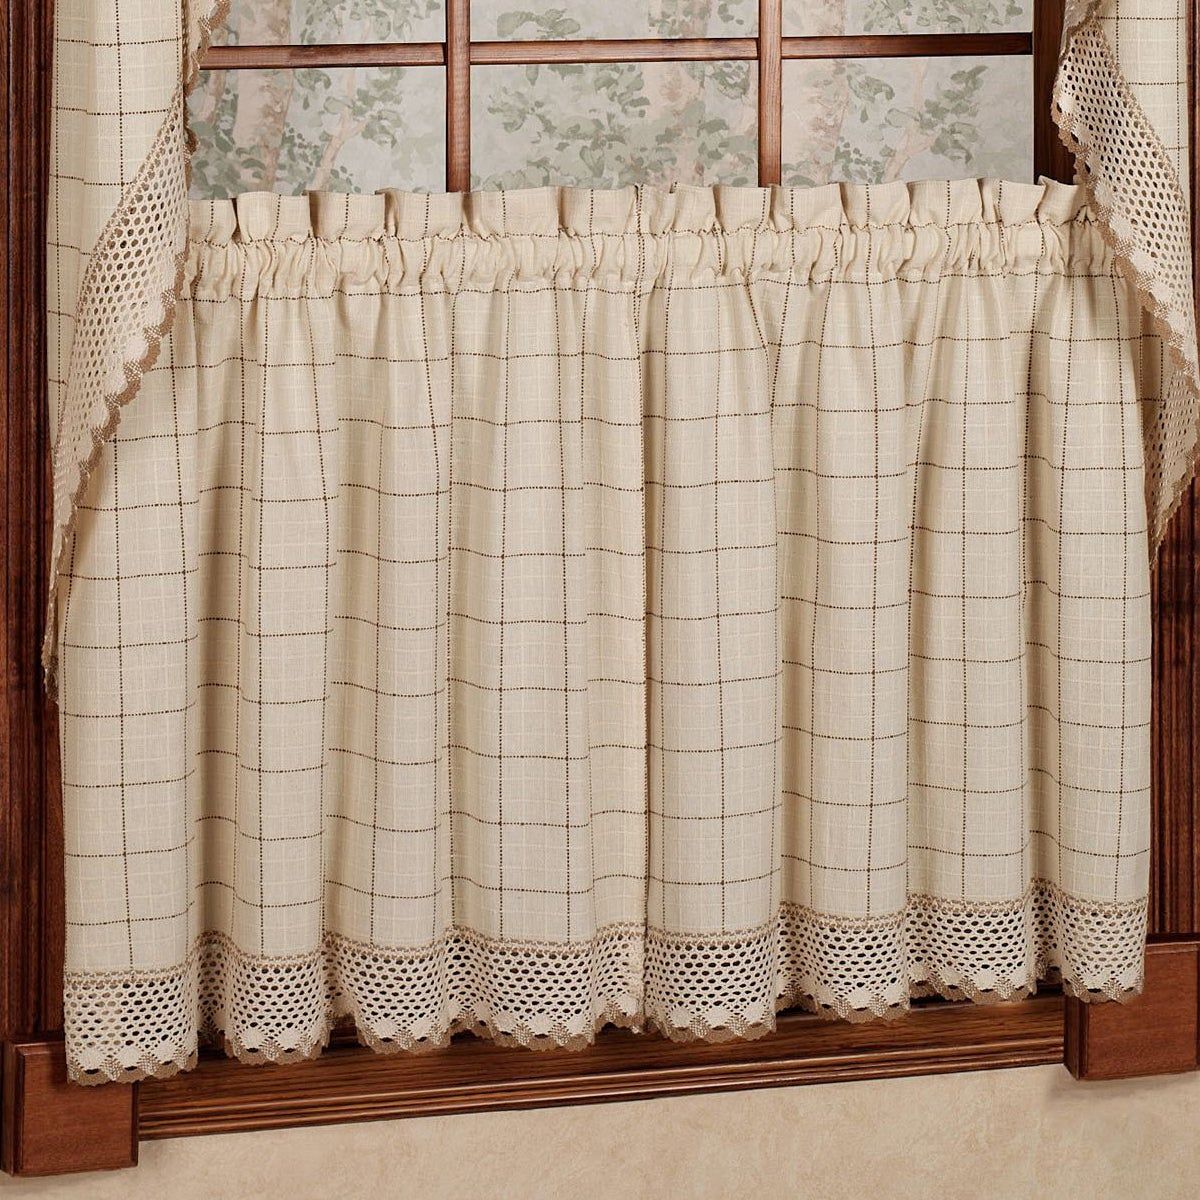 Cotton Classic Toast Window Pane Pattern And Crotchet Trim Tiers, Swags And  Valance Options Inside Cotton Classic Toast Window Pane Pattern And Crotchet Trim Tiers (View 1 of 20)